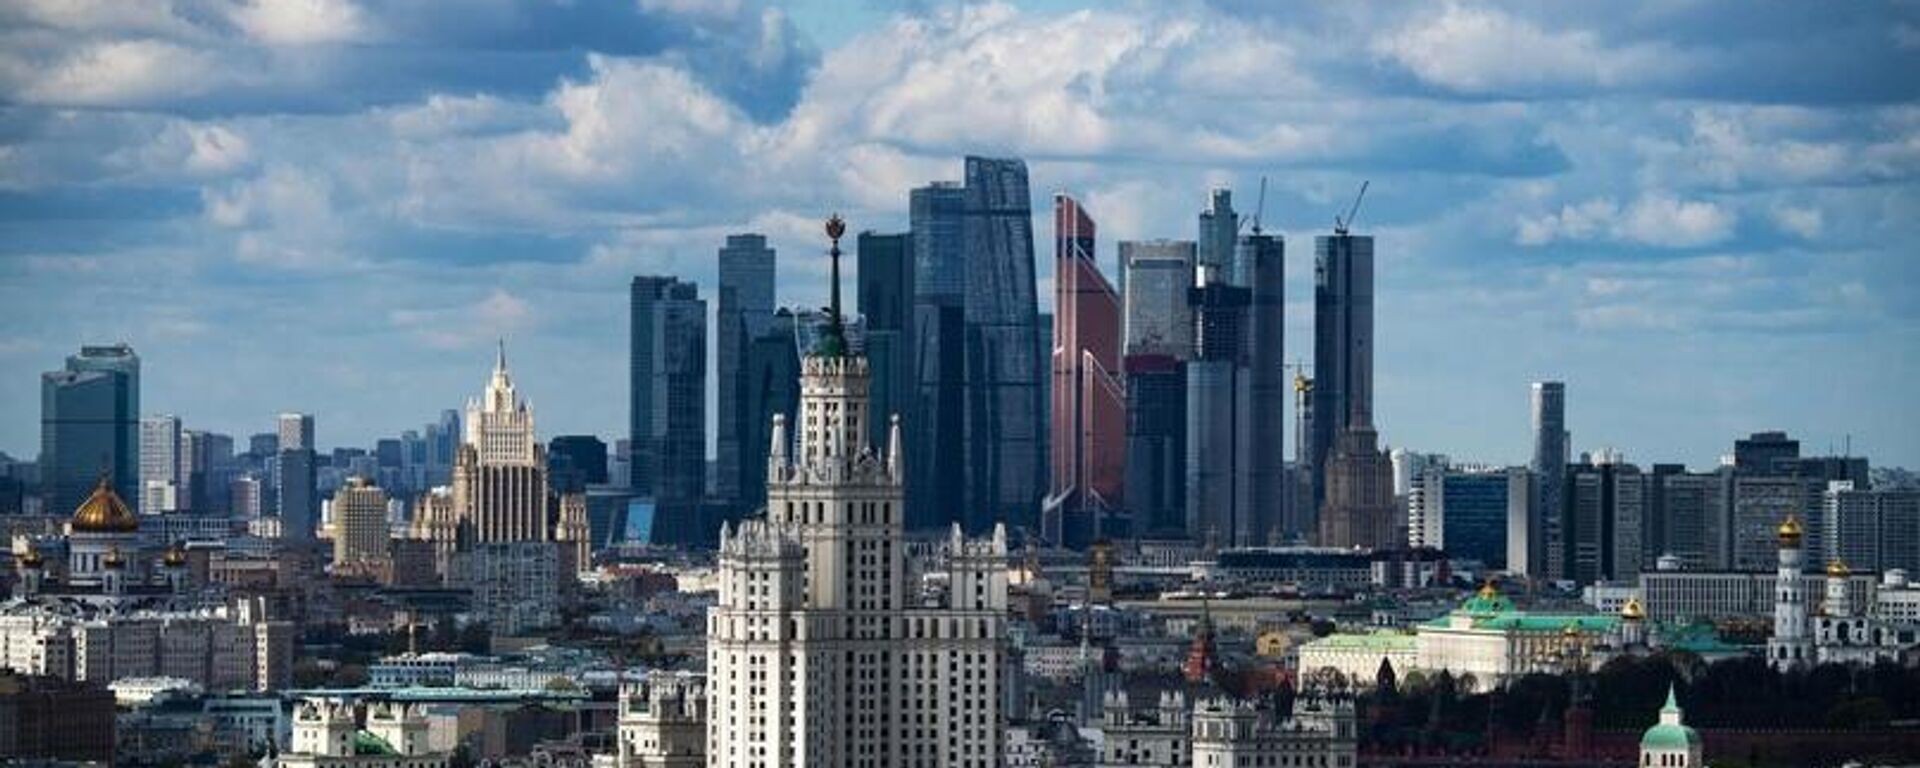 A general view shows the Soviet era skyscraper on Kotelnicheskaya Embankment of the Moskva river, Foreign ministry headquarters, Radisson Royal Hotel Moscow, the Christ the Savior cathedral and the Kremlin, with the Moscow International Business Centre, also known as Moskva-City, seen in te background, in Moscow, Russia - Sputnik International, 1920, 26.04.2023